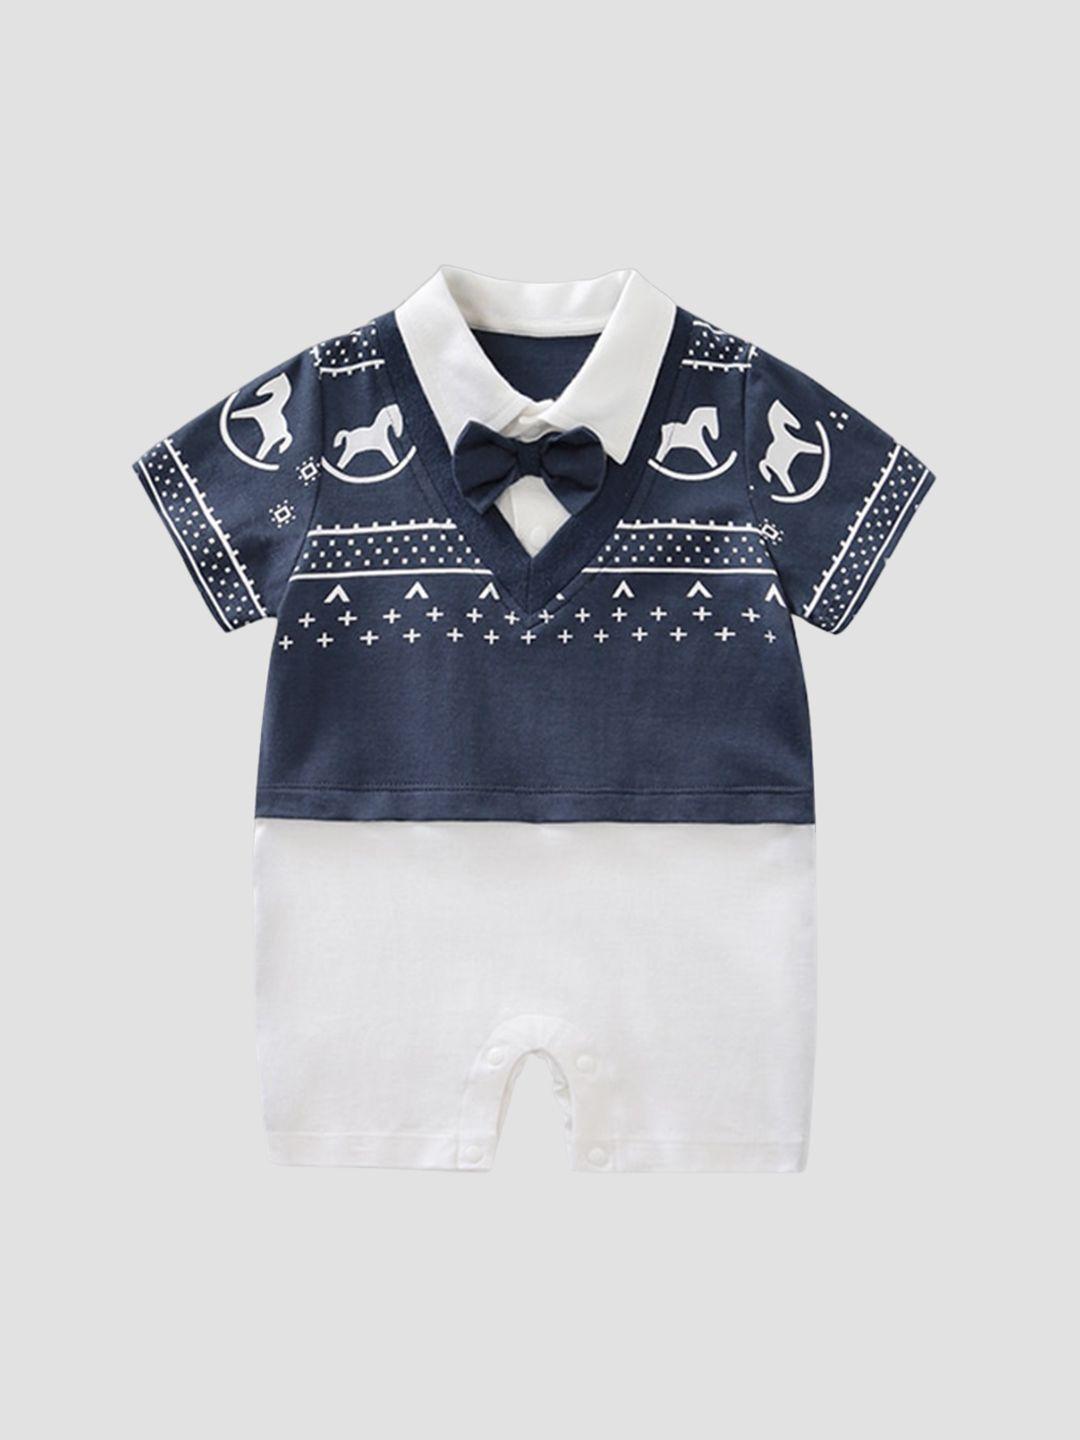 stylecast infant boys navy blue conversational printed cotton rompers